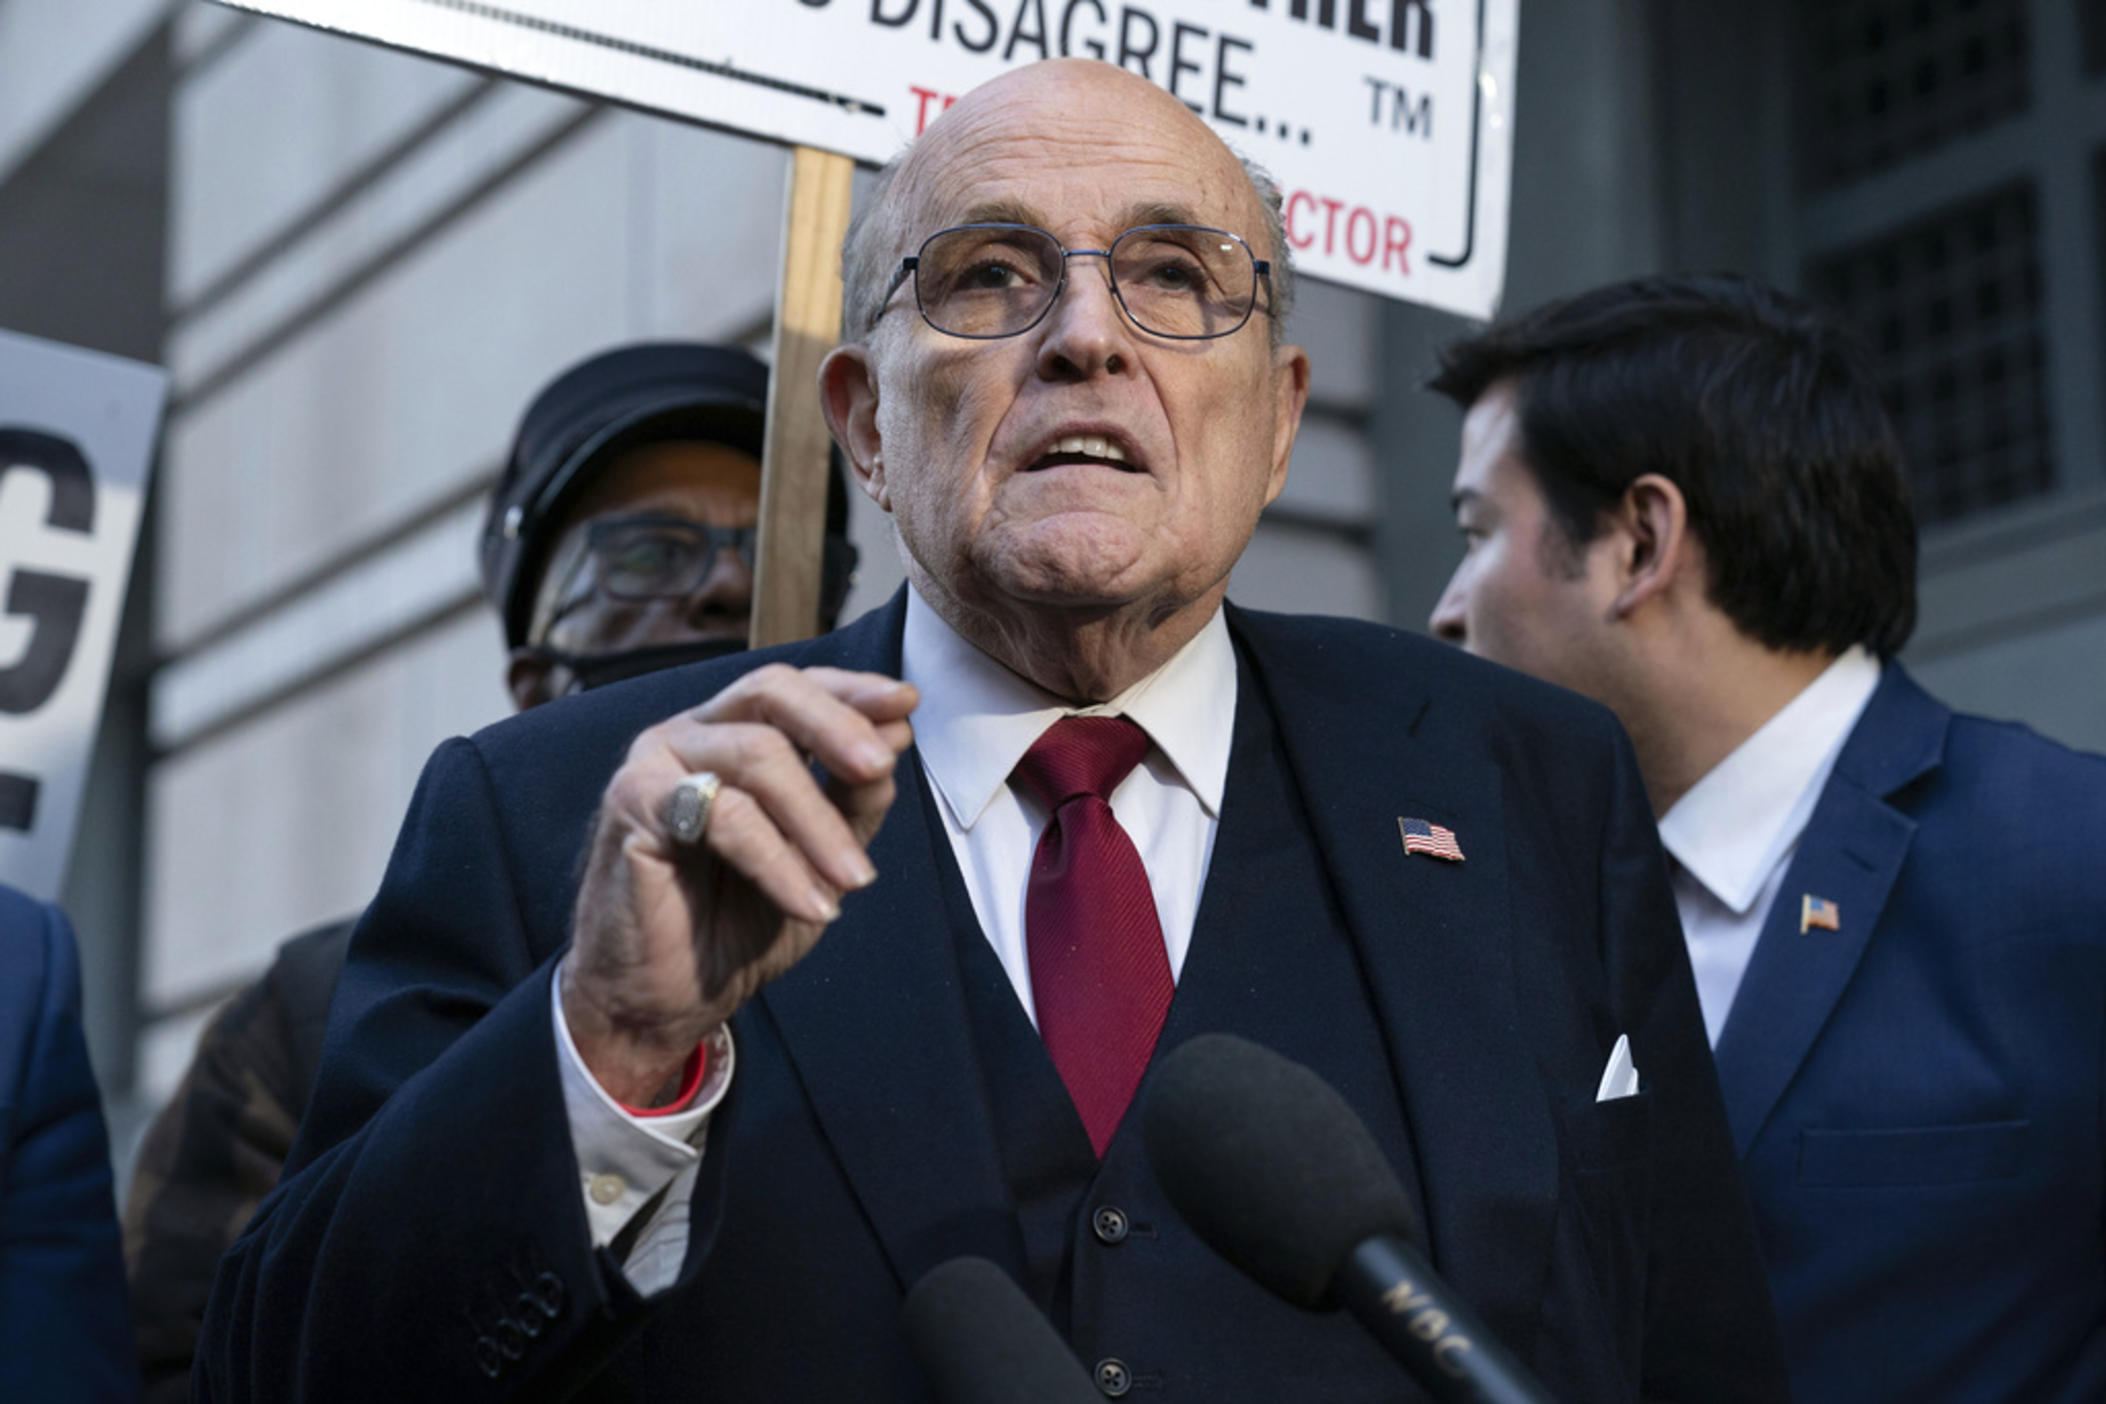 Former Mayor of New York Rudy Giuliani speaks during a news conference outside the federal courthouse in Washington, Friday, Dec. 15, 2023. Giuliani has filed for bankruptcy, days after being ordered to pay $148 million in a defamation lawsuit.